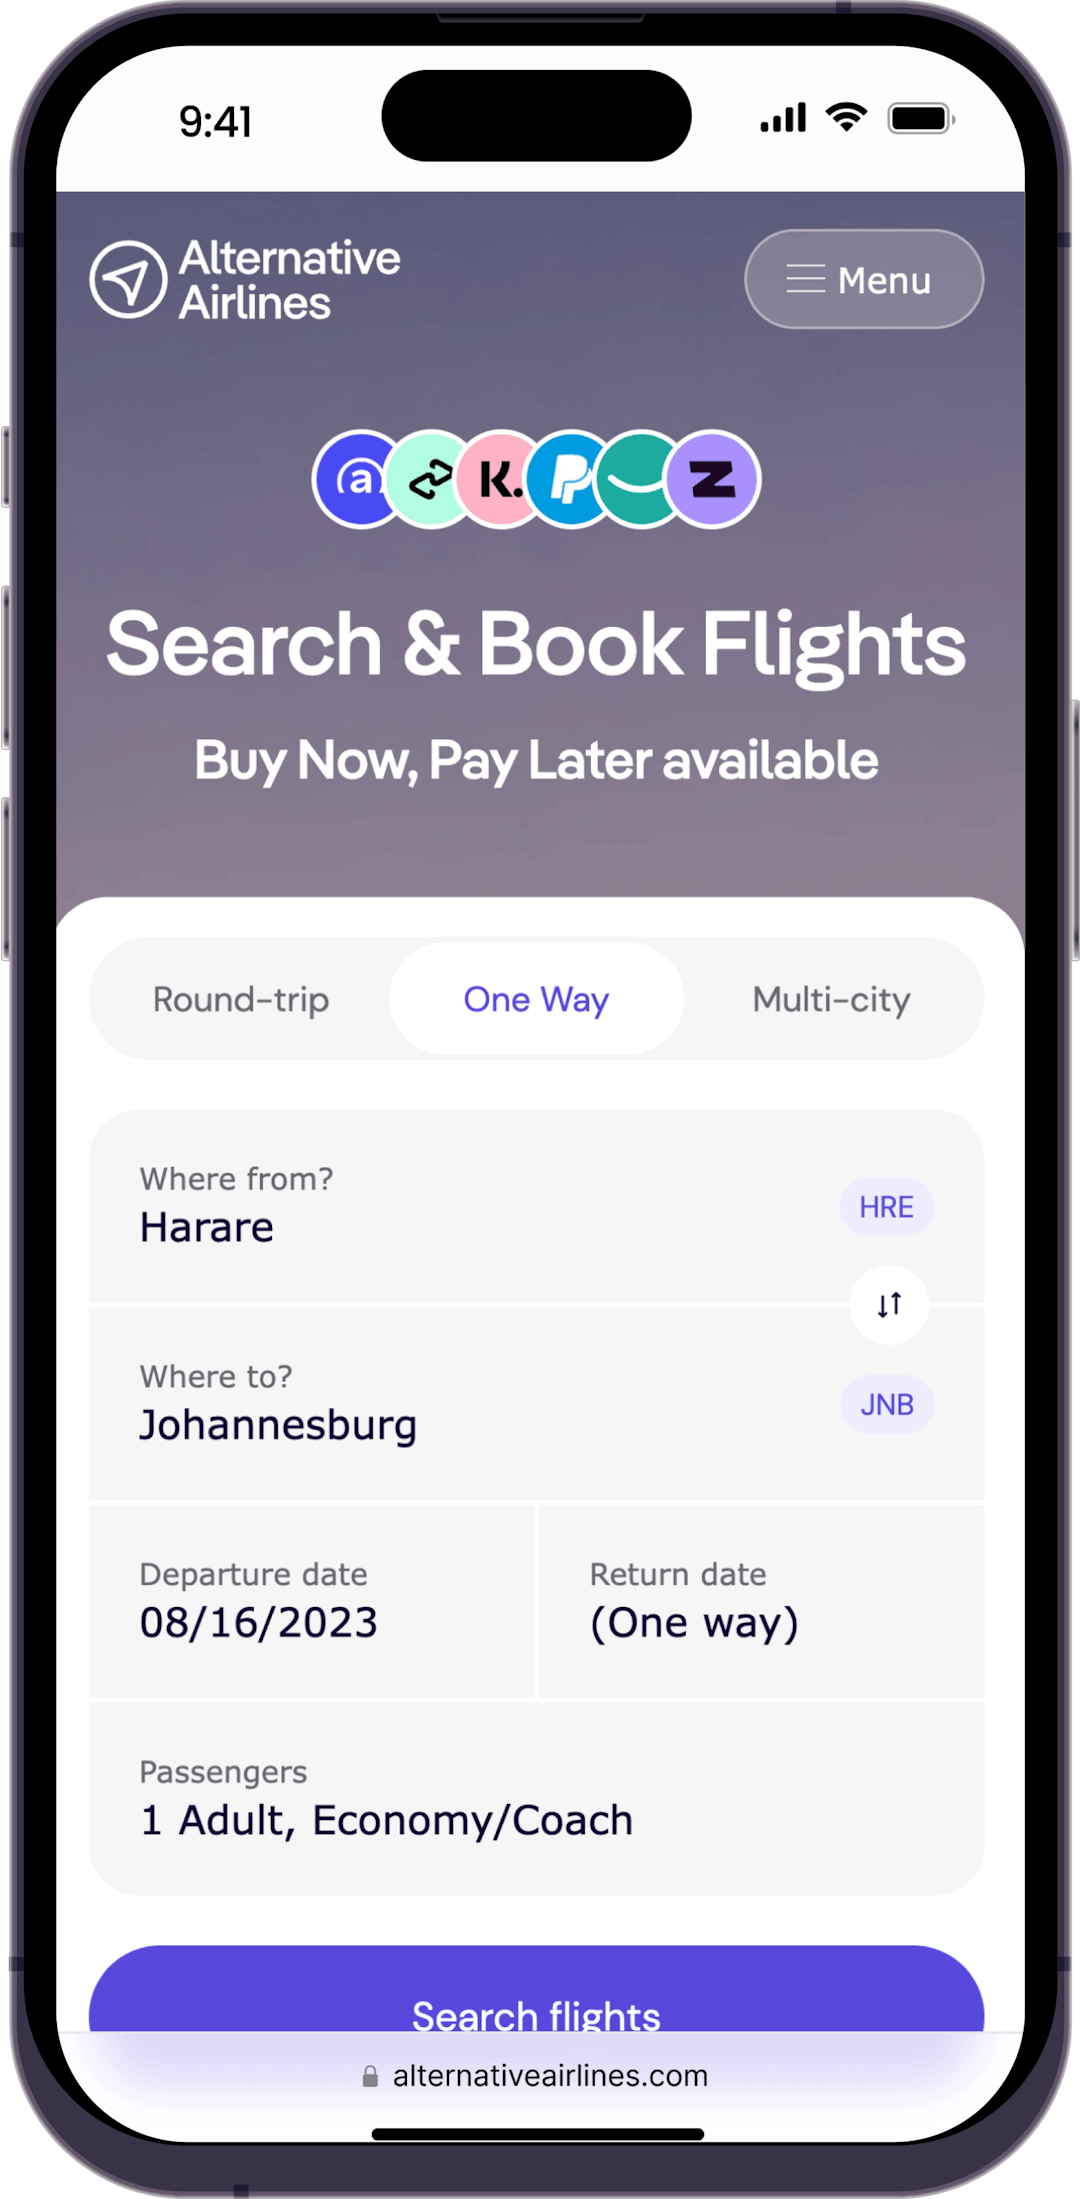 Step 1 - Search for flights on Alternative Airlines